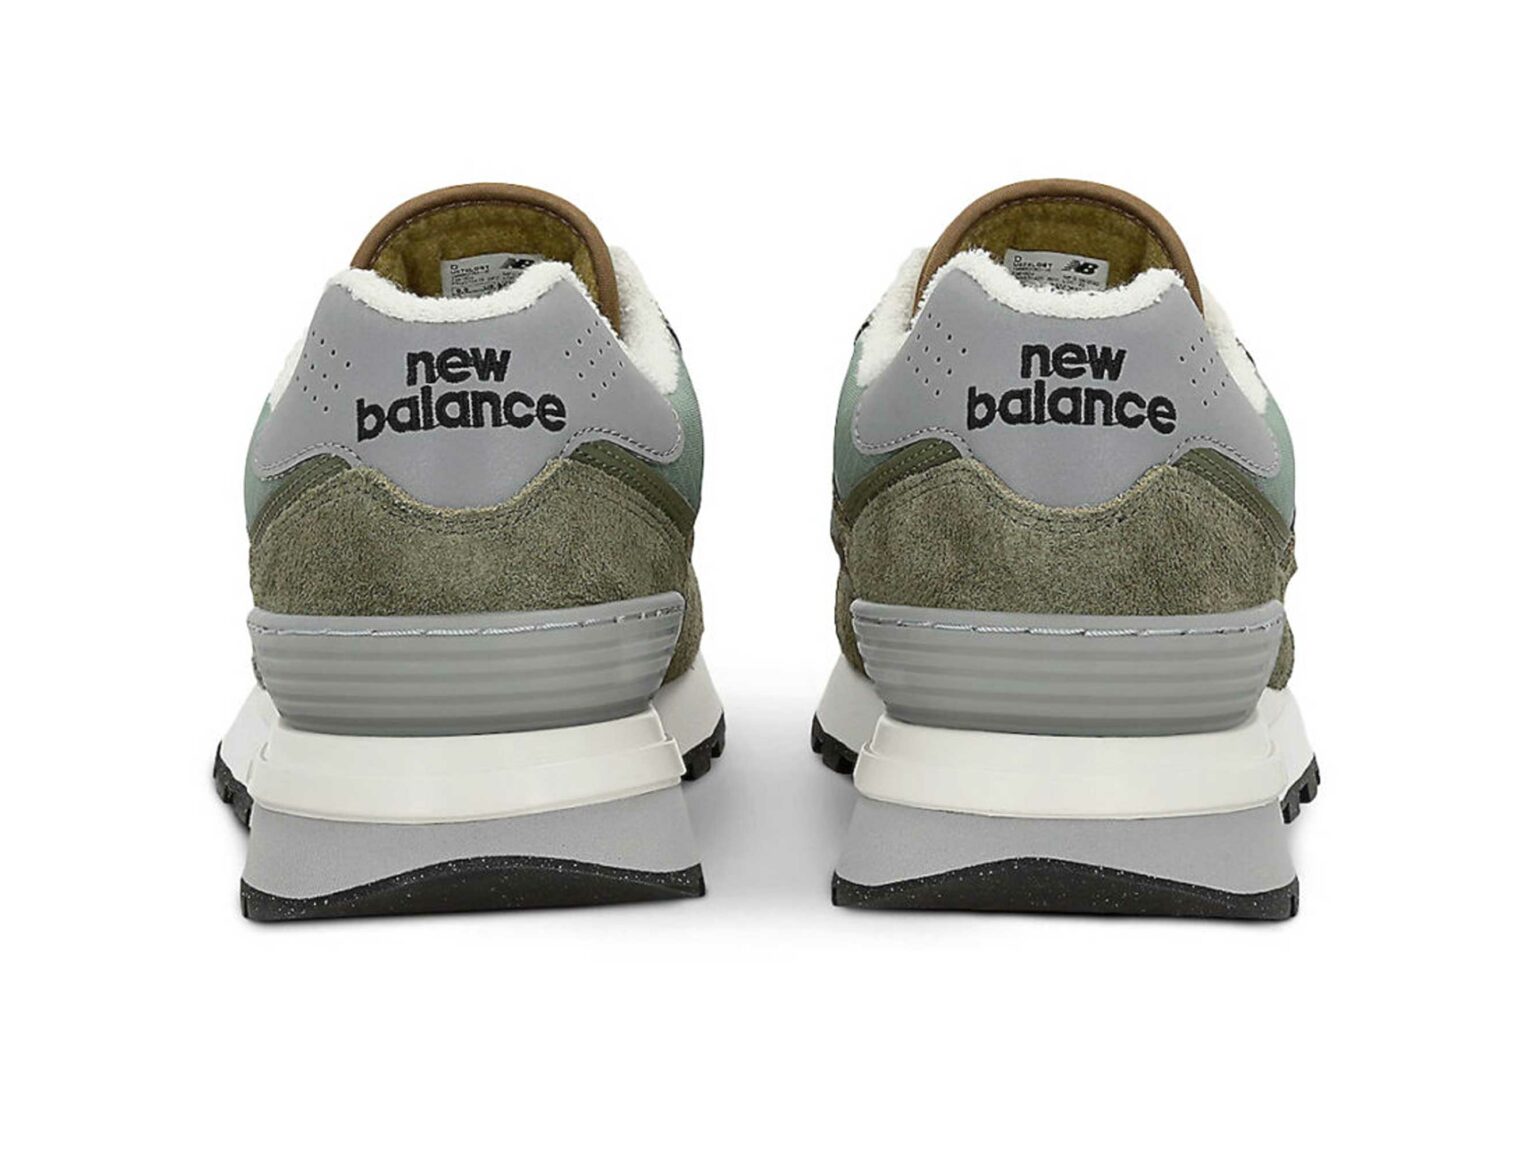 Sneaker Obsessed? Check out Stone Island x New Balance 574 Legacy